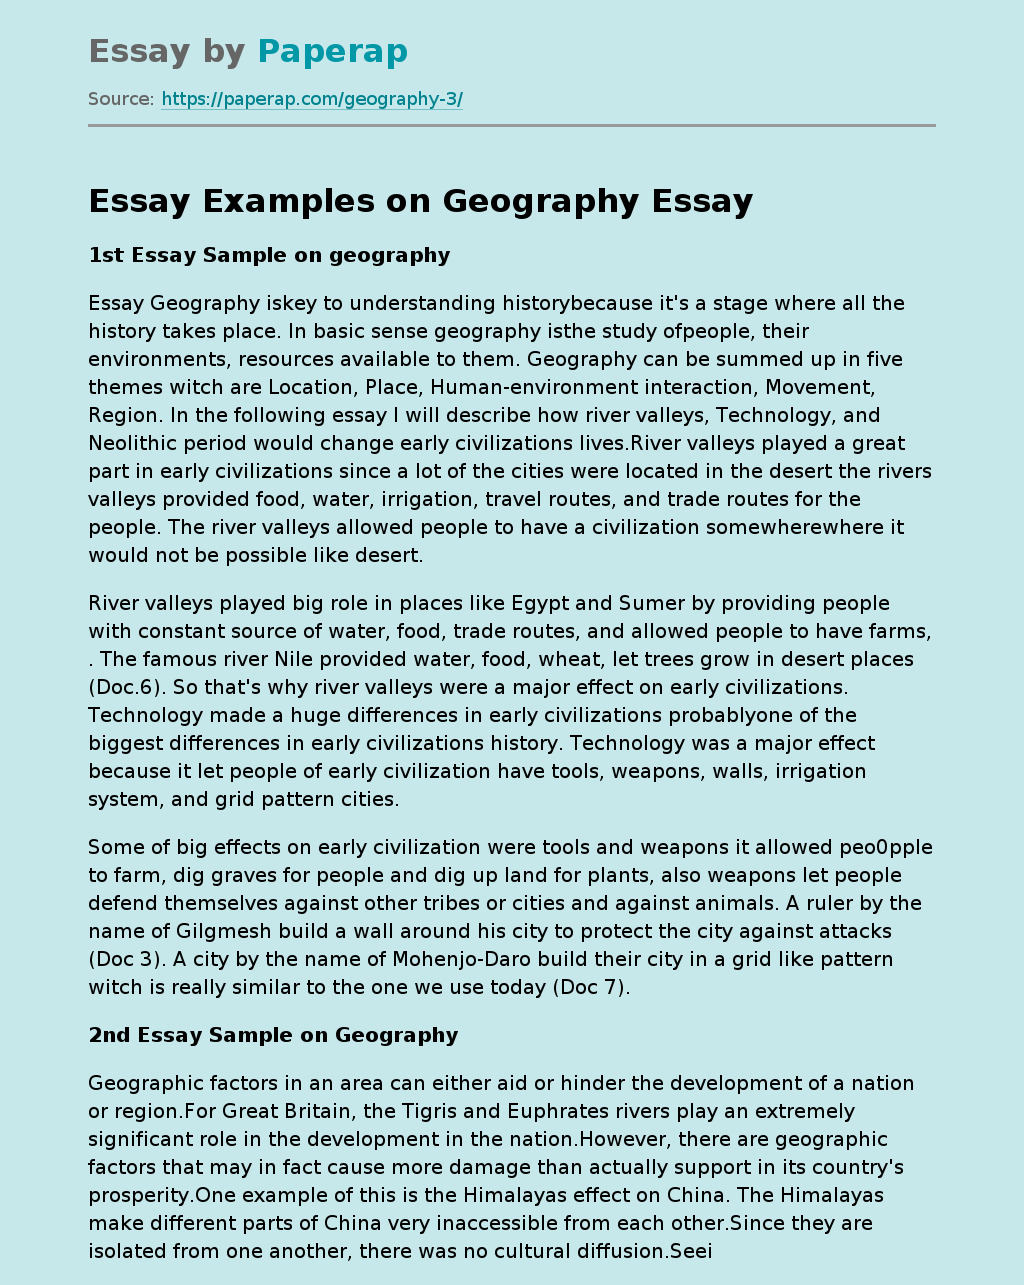 Essay Examples on Geography